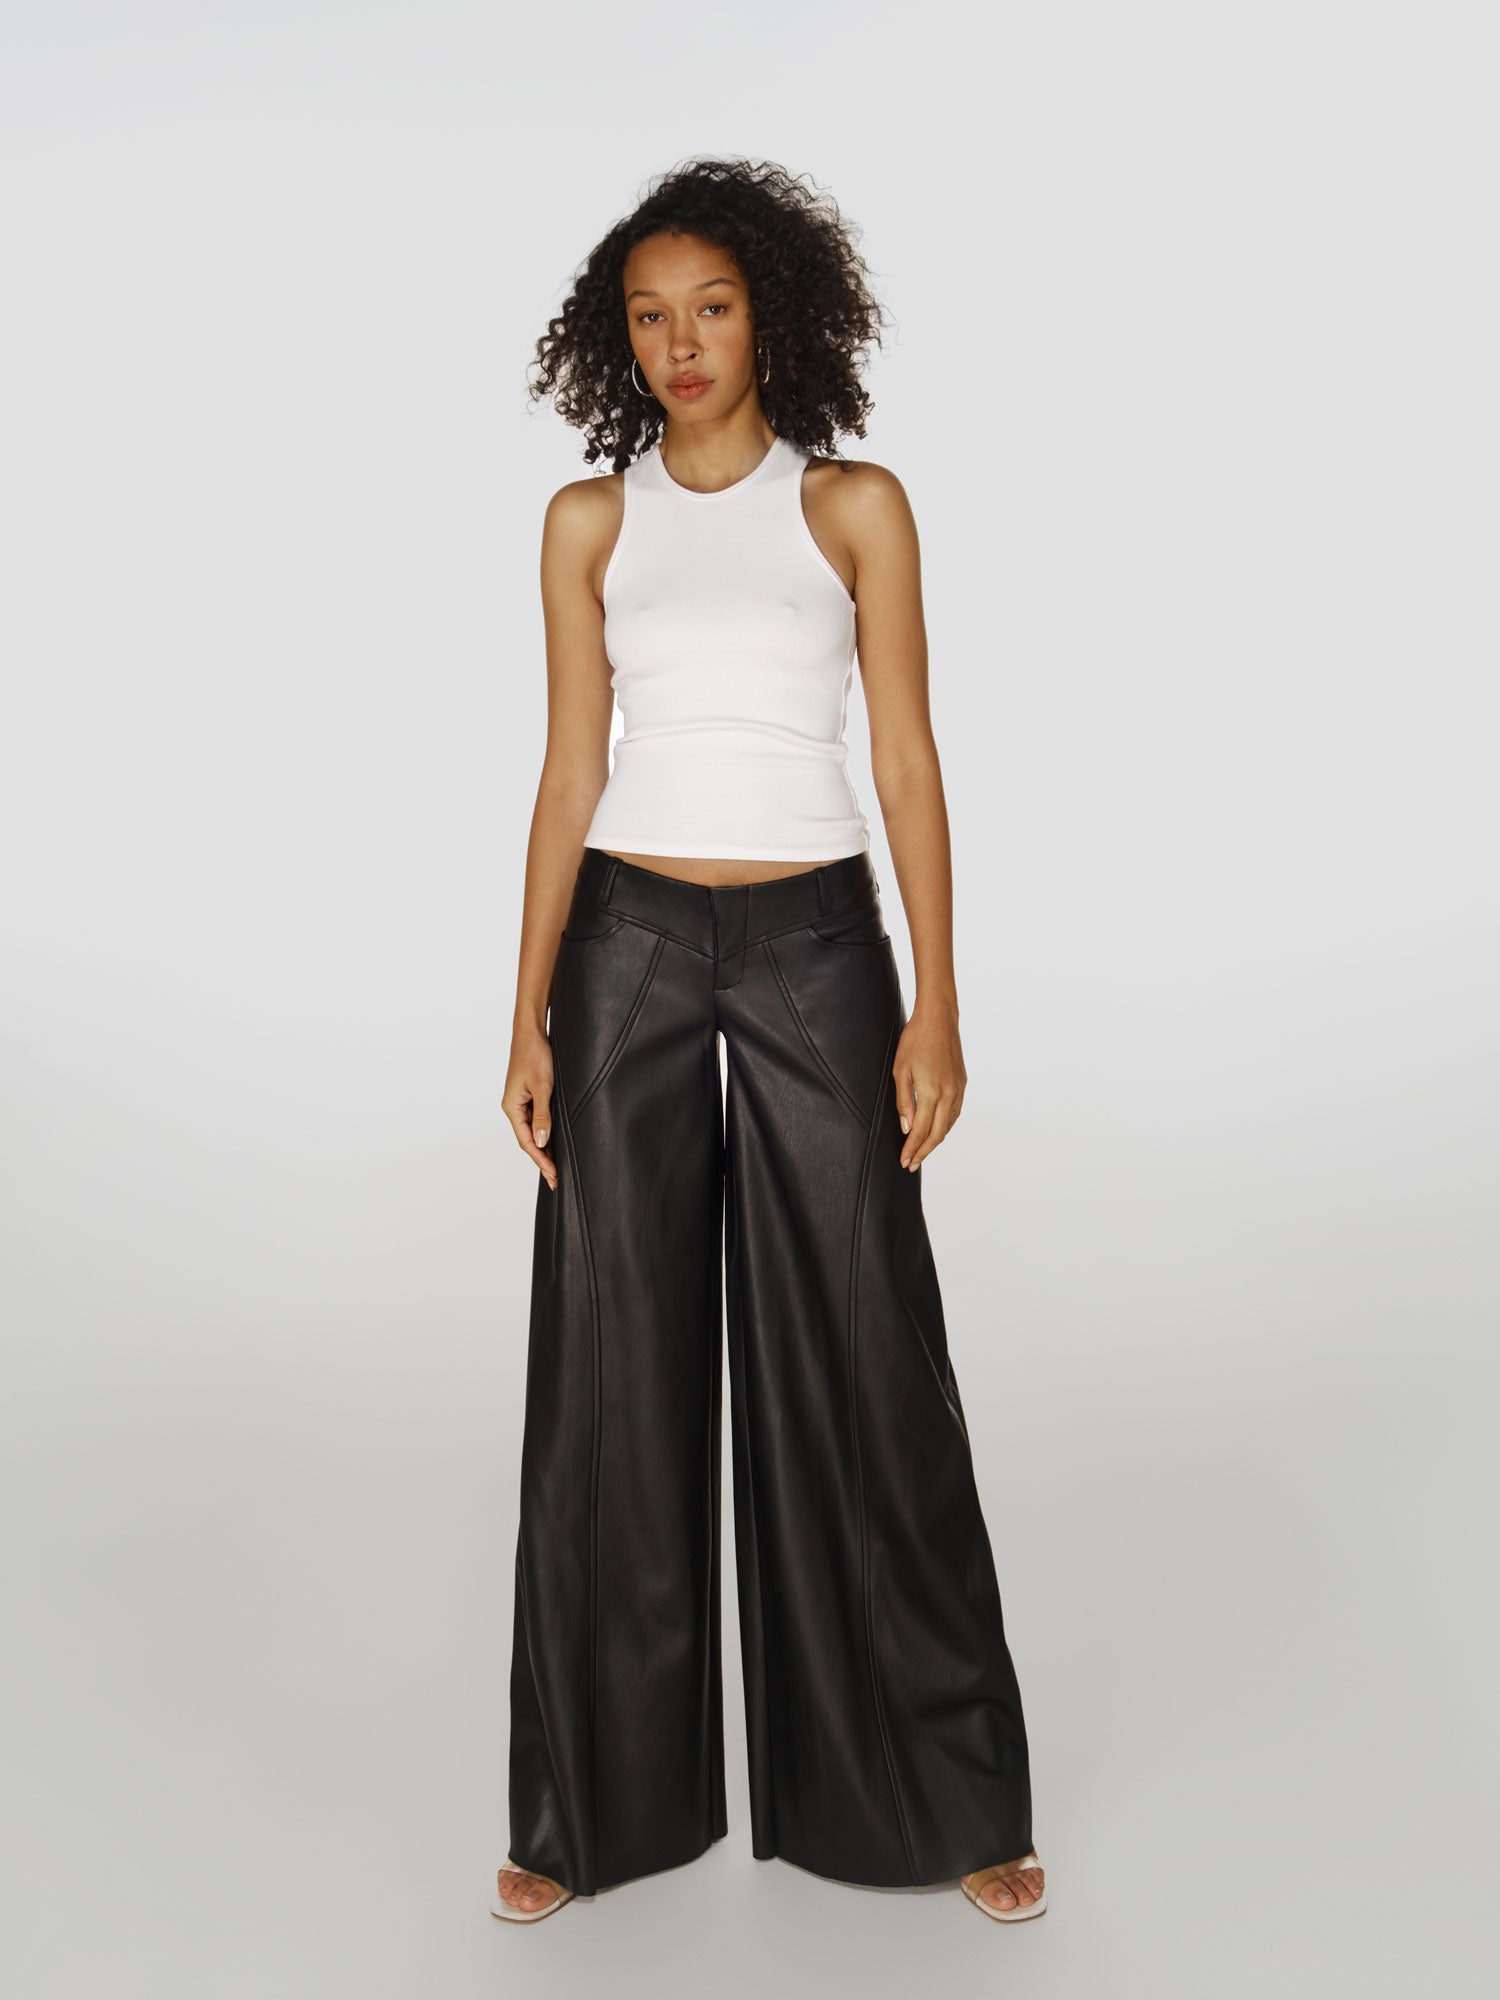 Full shot of a girl in a white viscose tank top and black vegan leather low rise wide leg pants